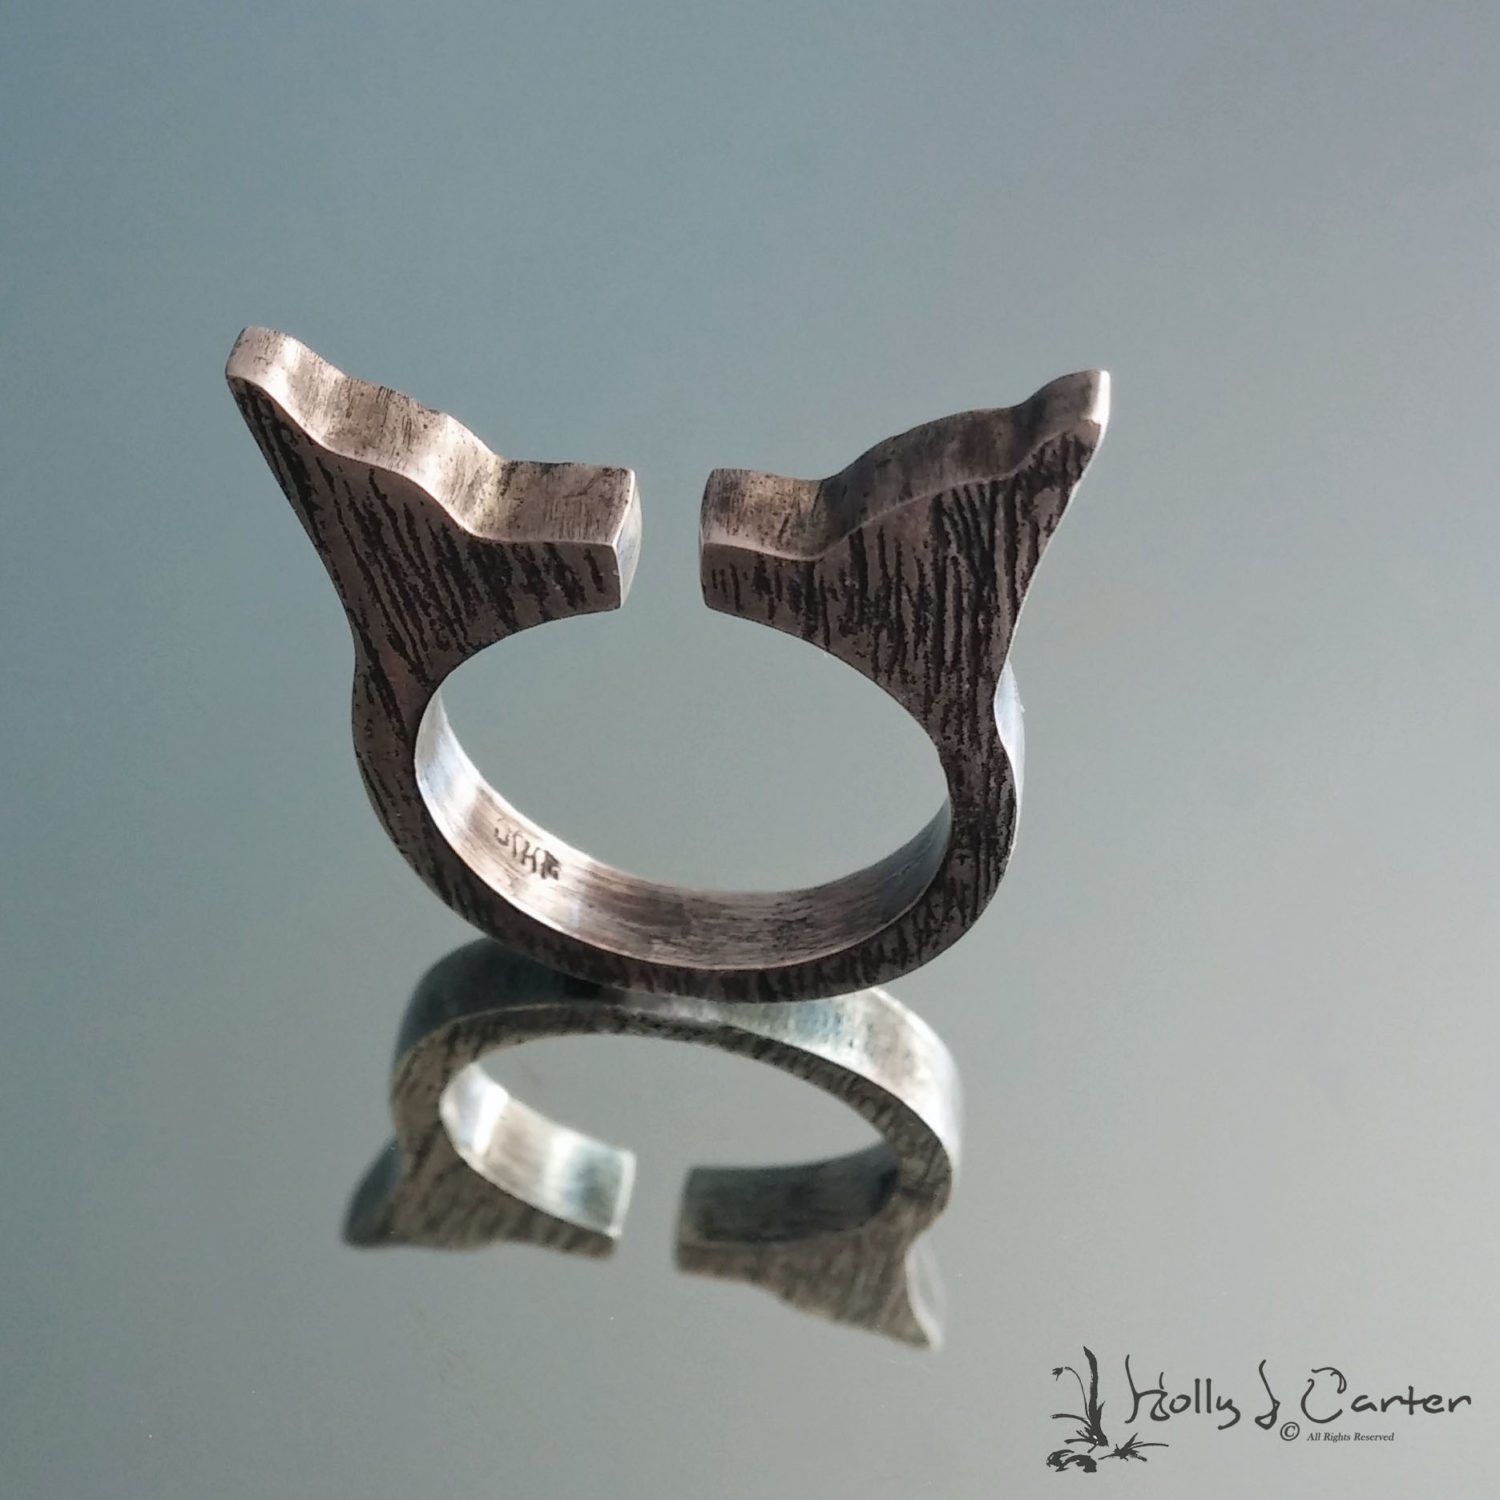 Wood Grain Sterling Silver Ring by Holly J Carter